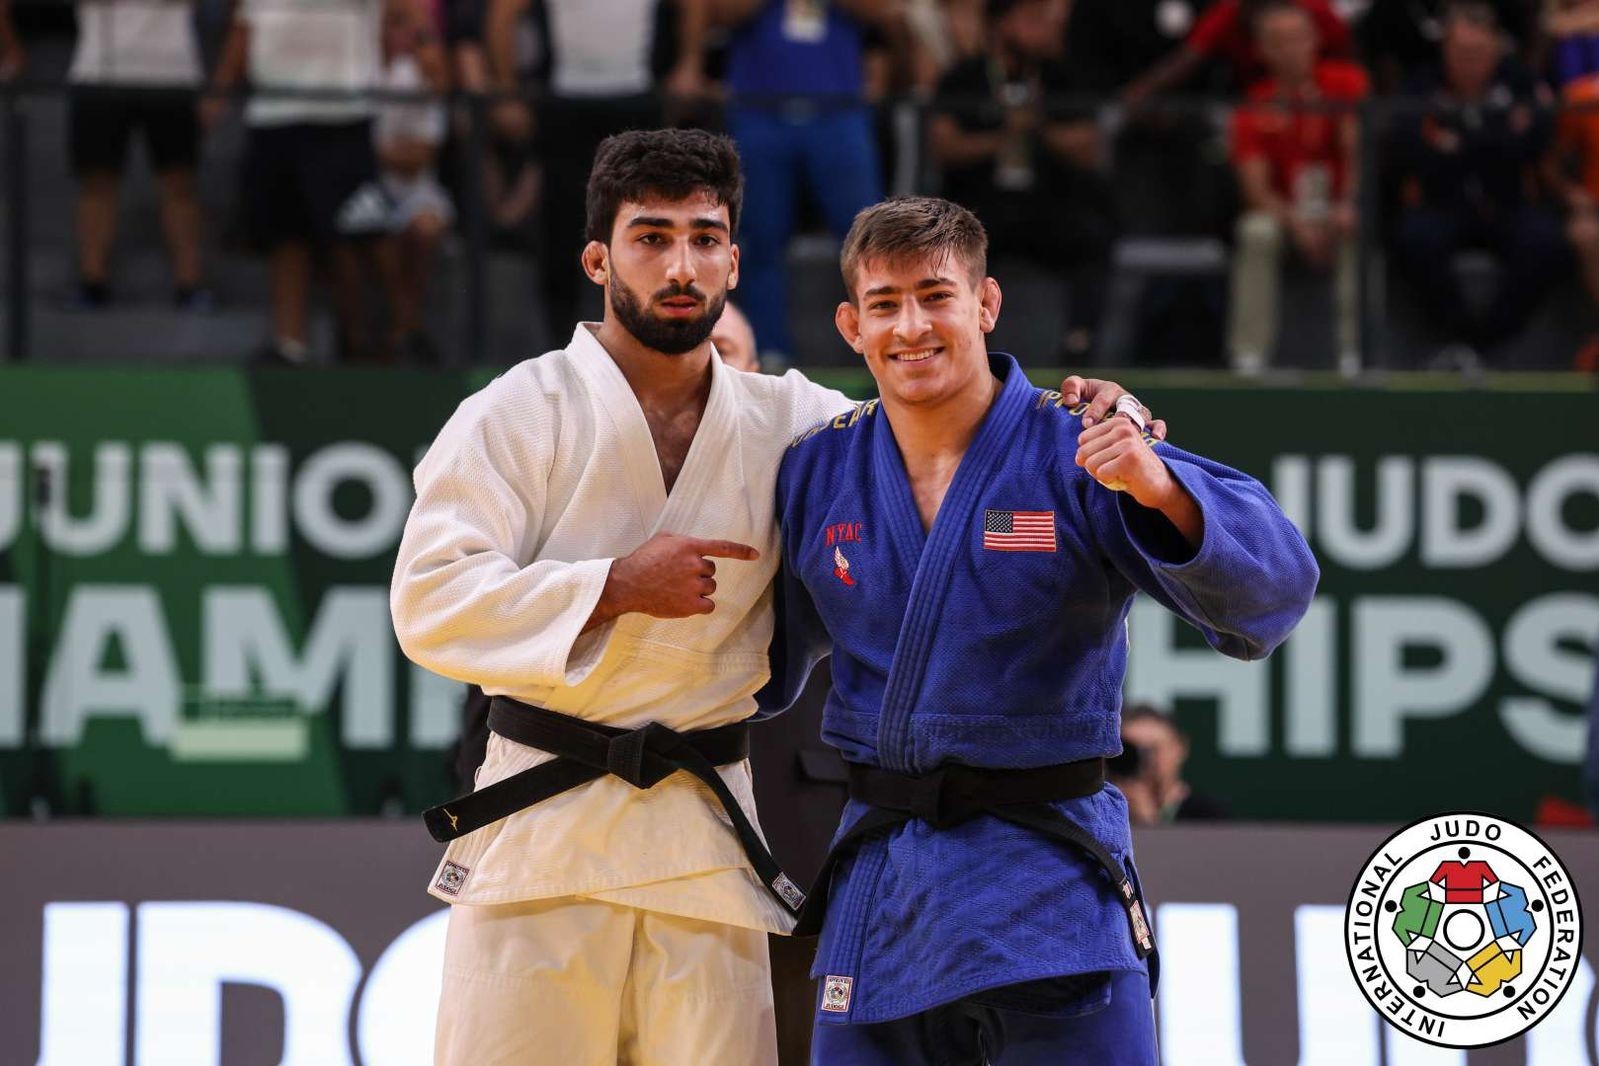 The USA comes to Baku with an athlete defeated by our judoka